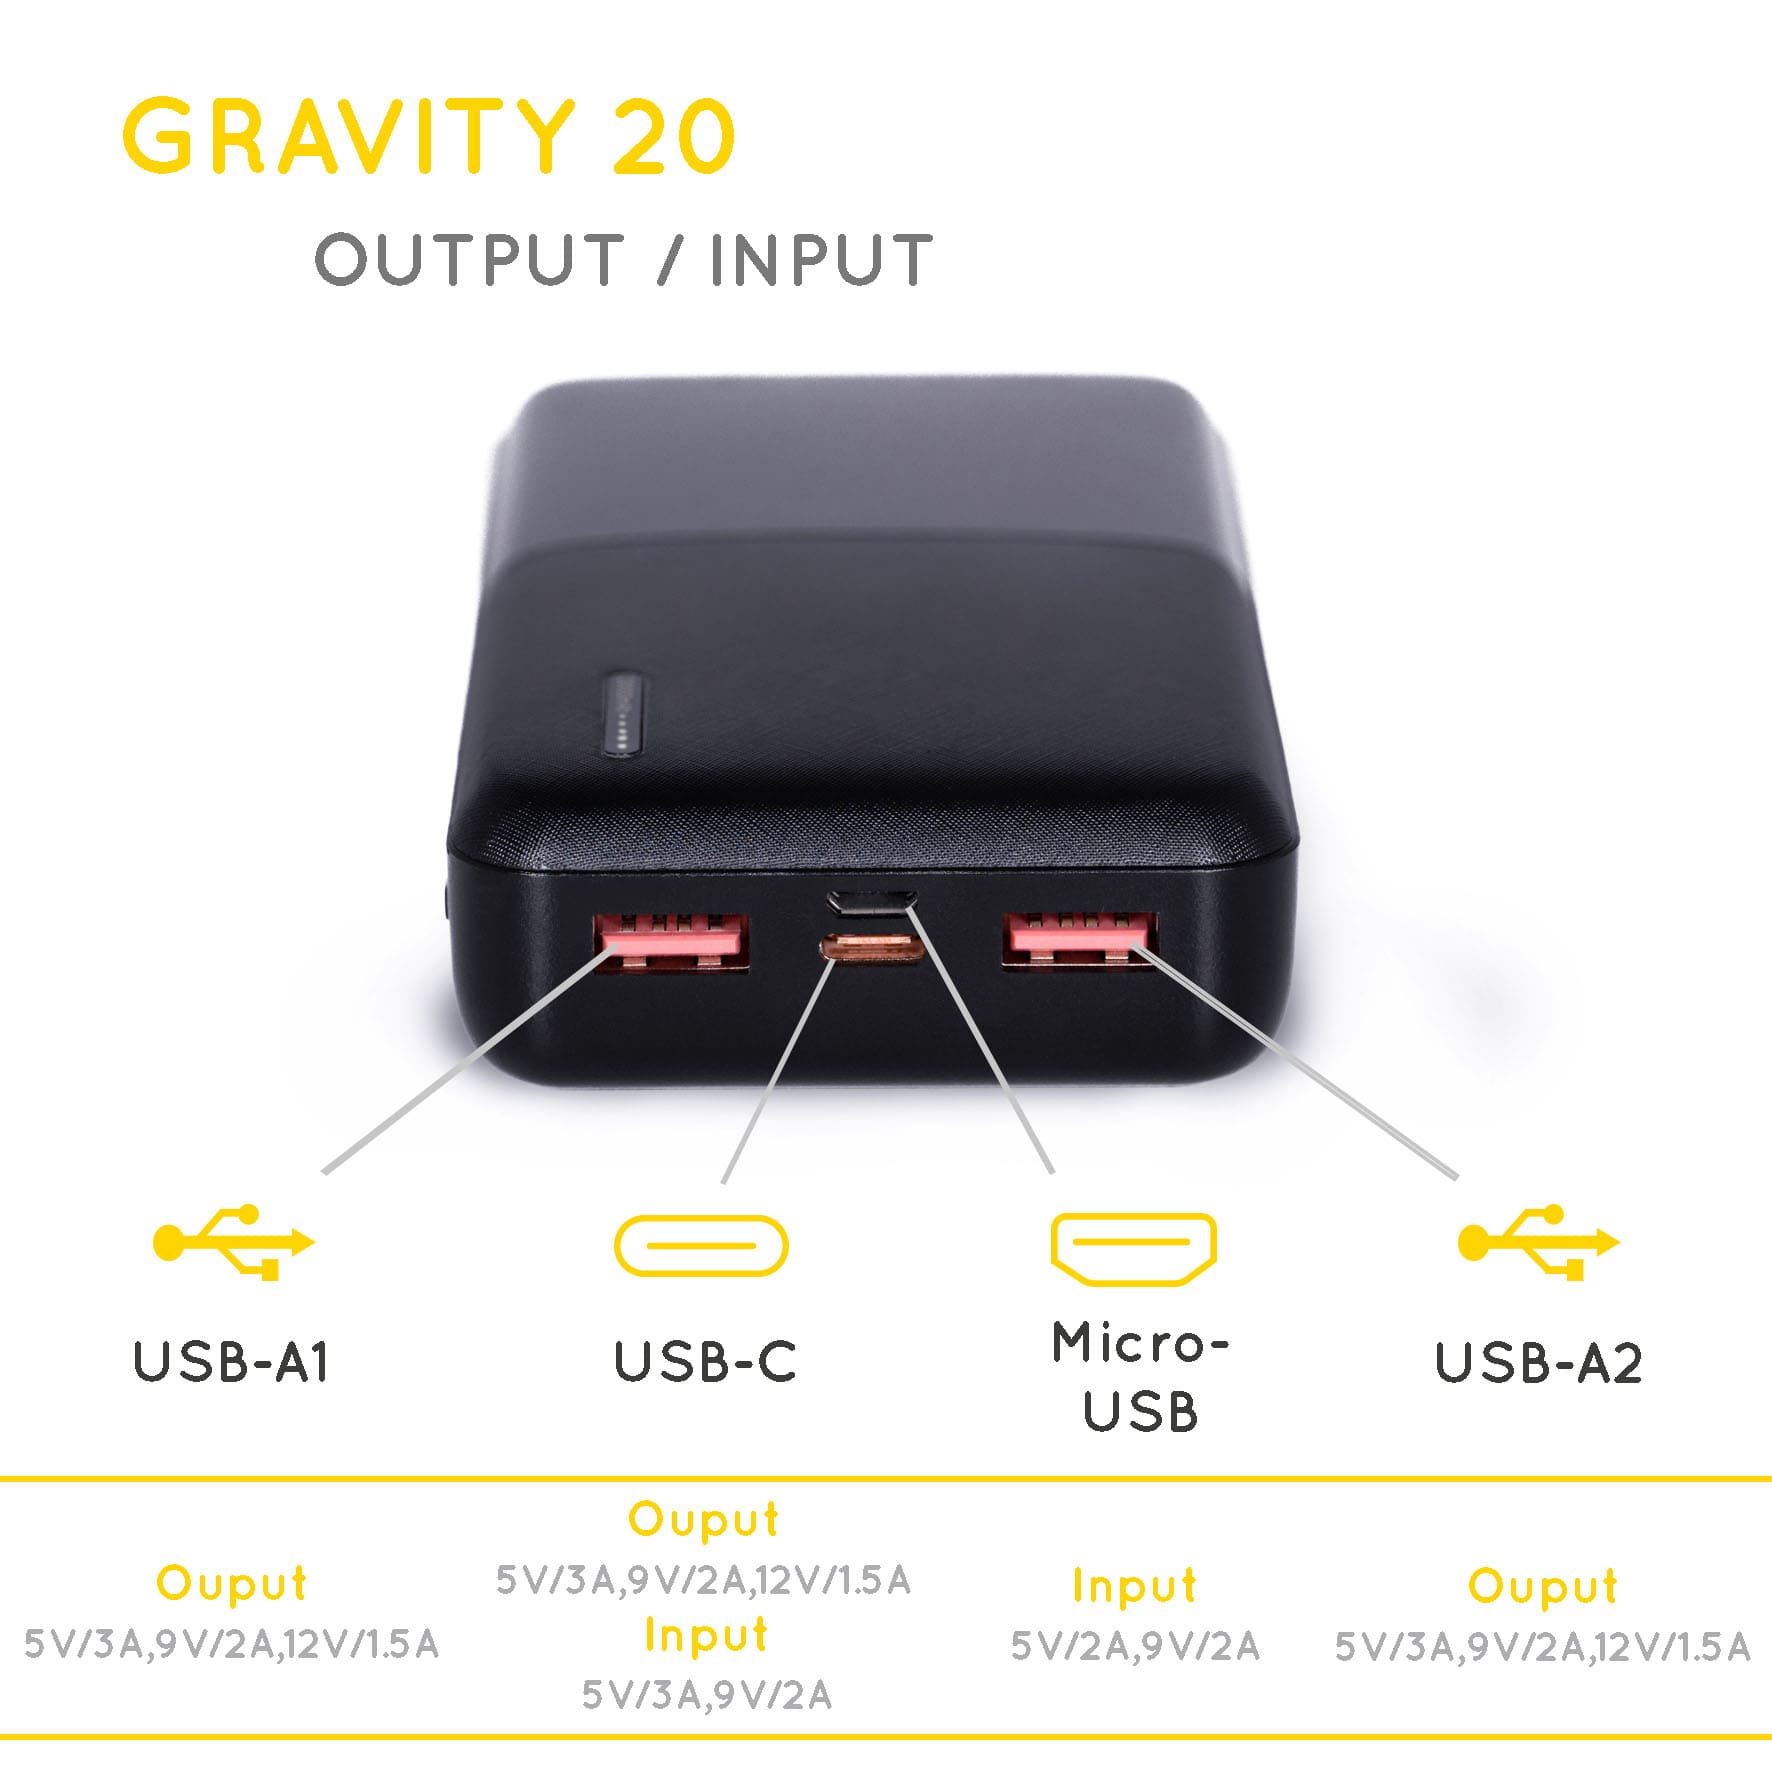 power bank Gravity 20 output and input explanation : 2 x USB-A, USB-C, Micro-USB